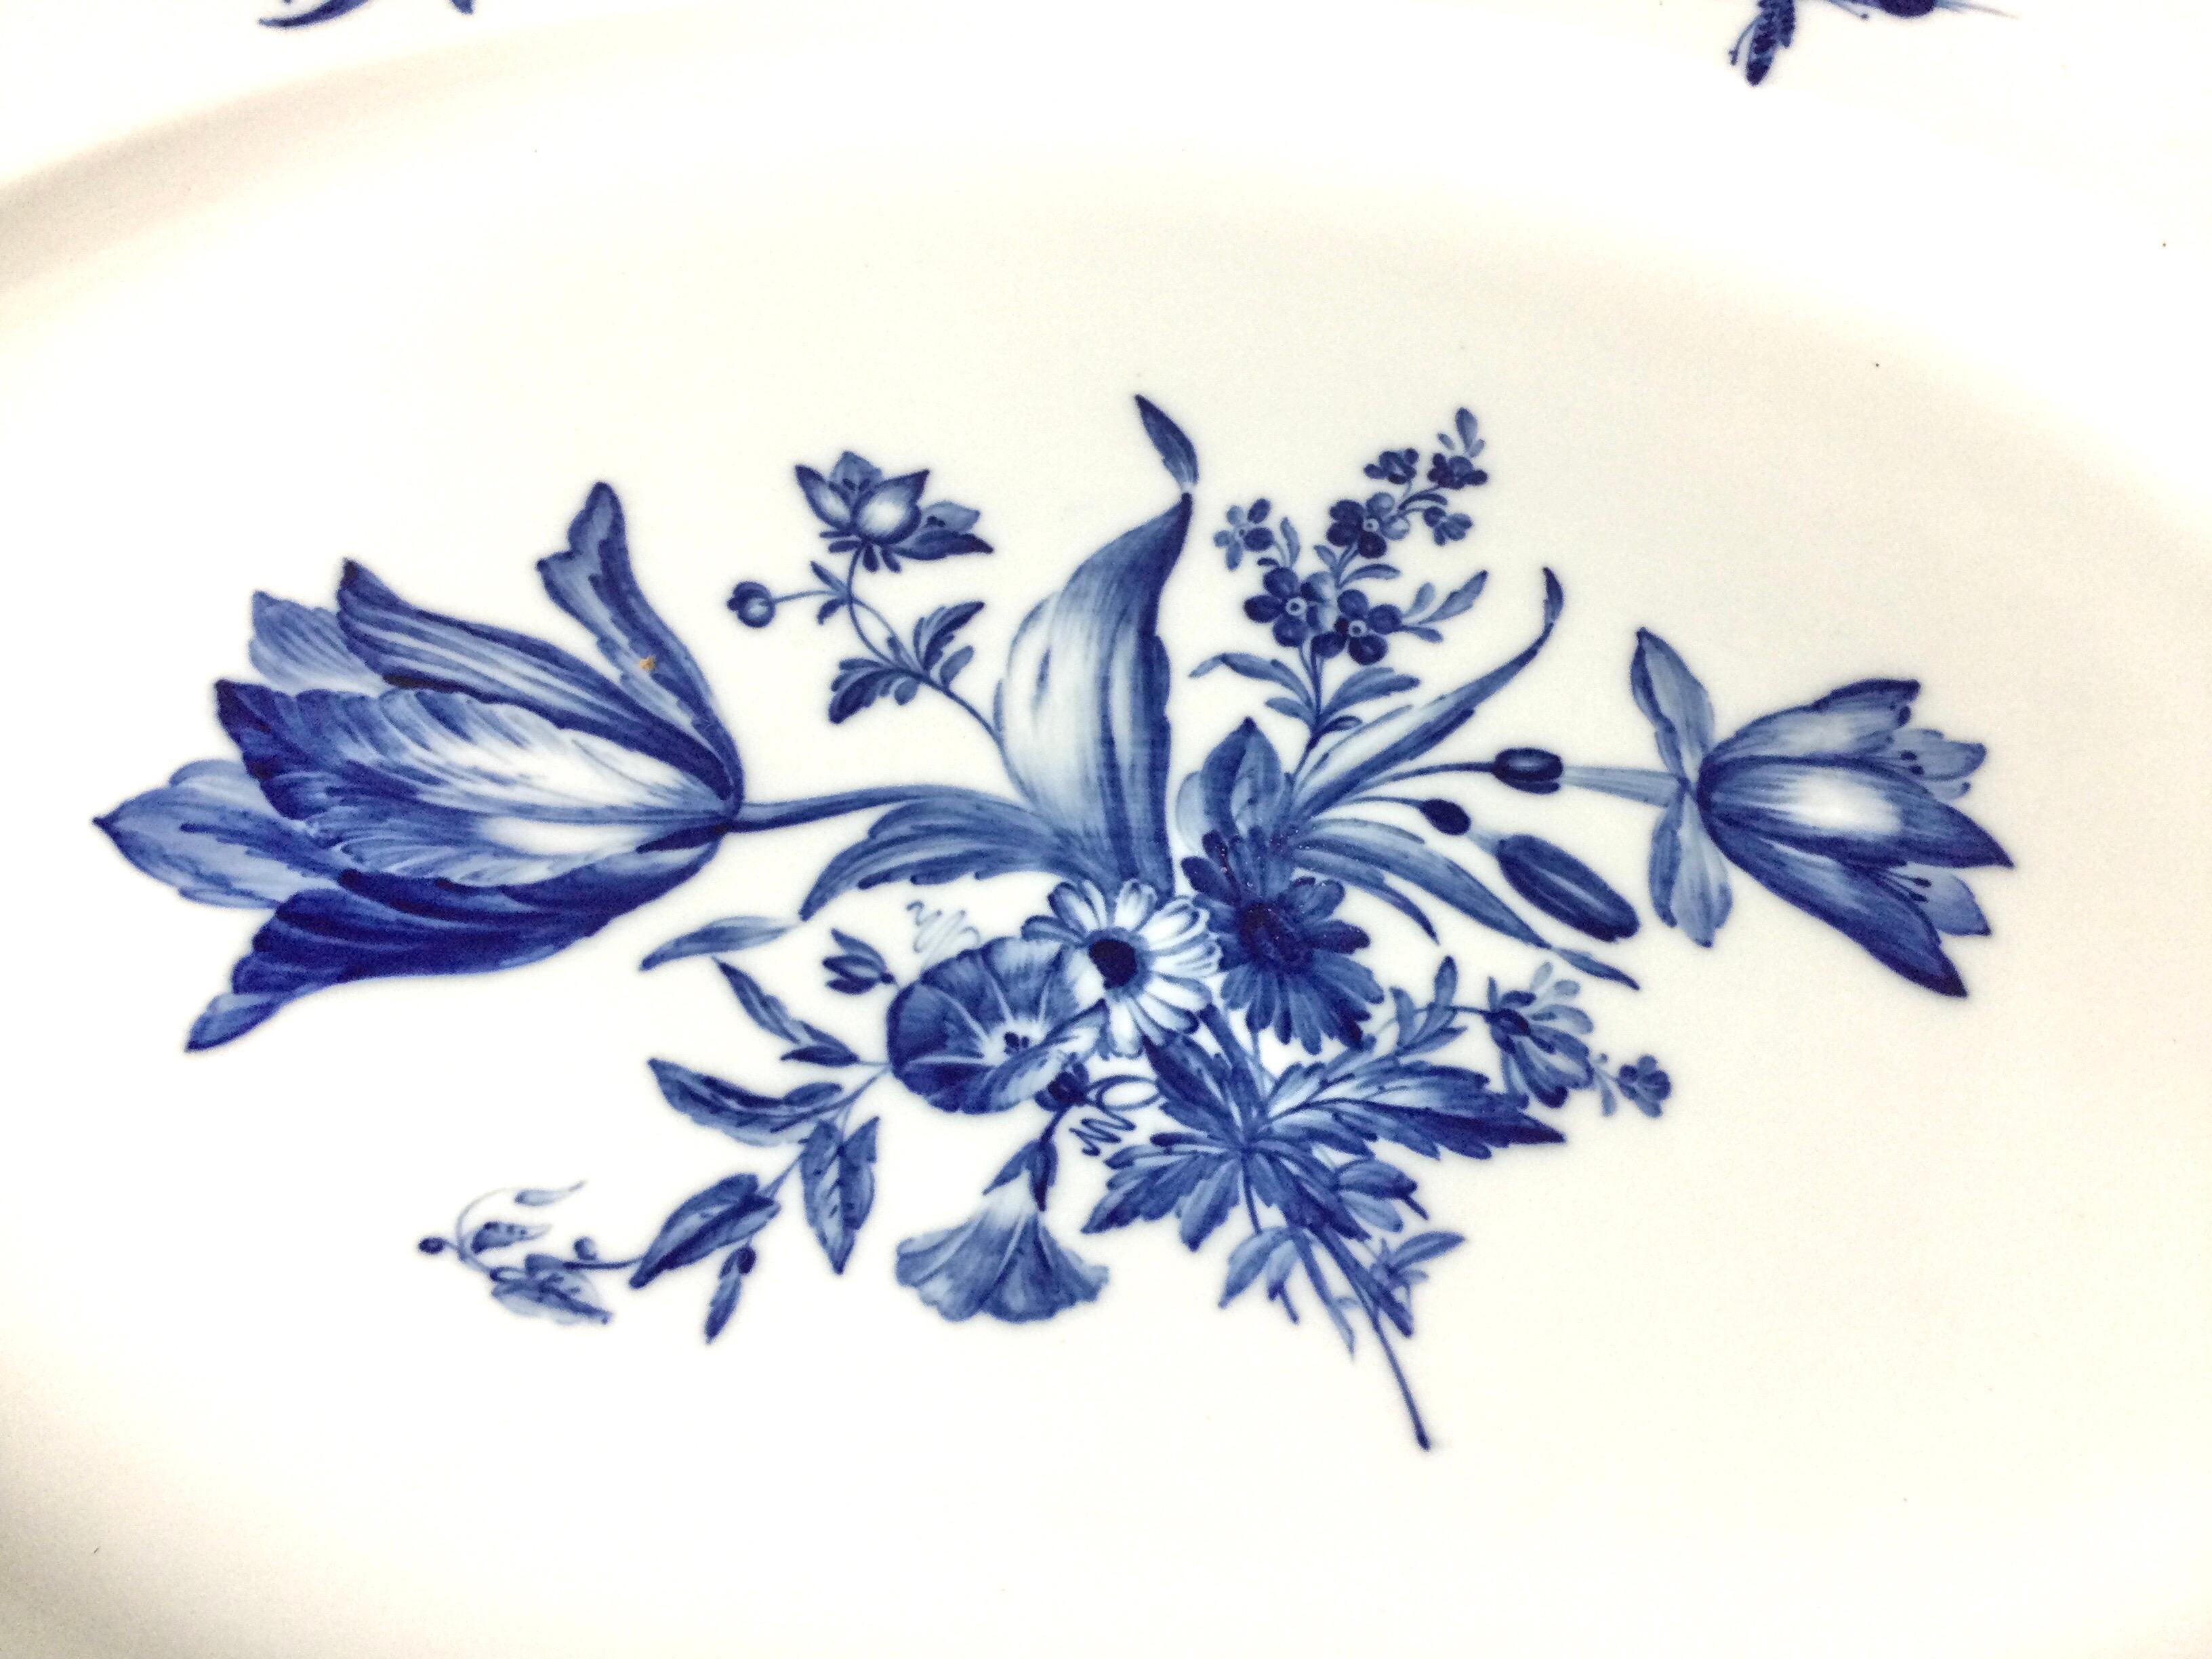 German Large Meissen Platter with Painted Blue Bouquet of Flowers and Insects